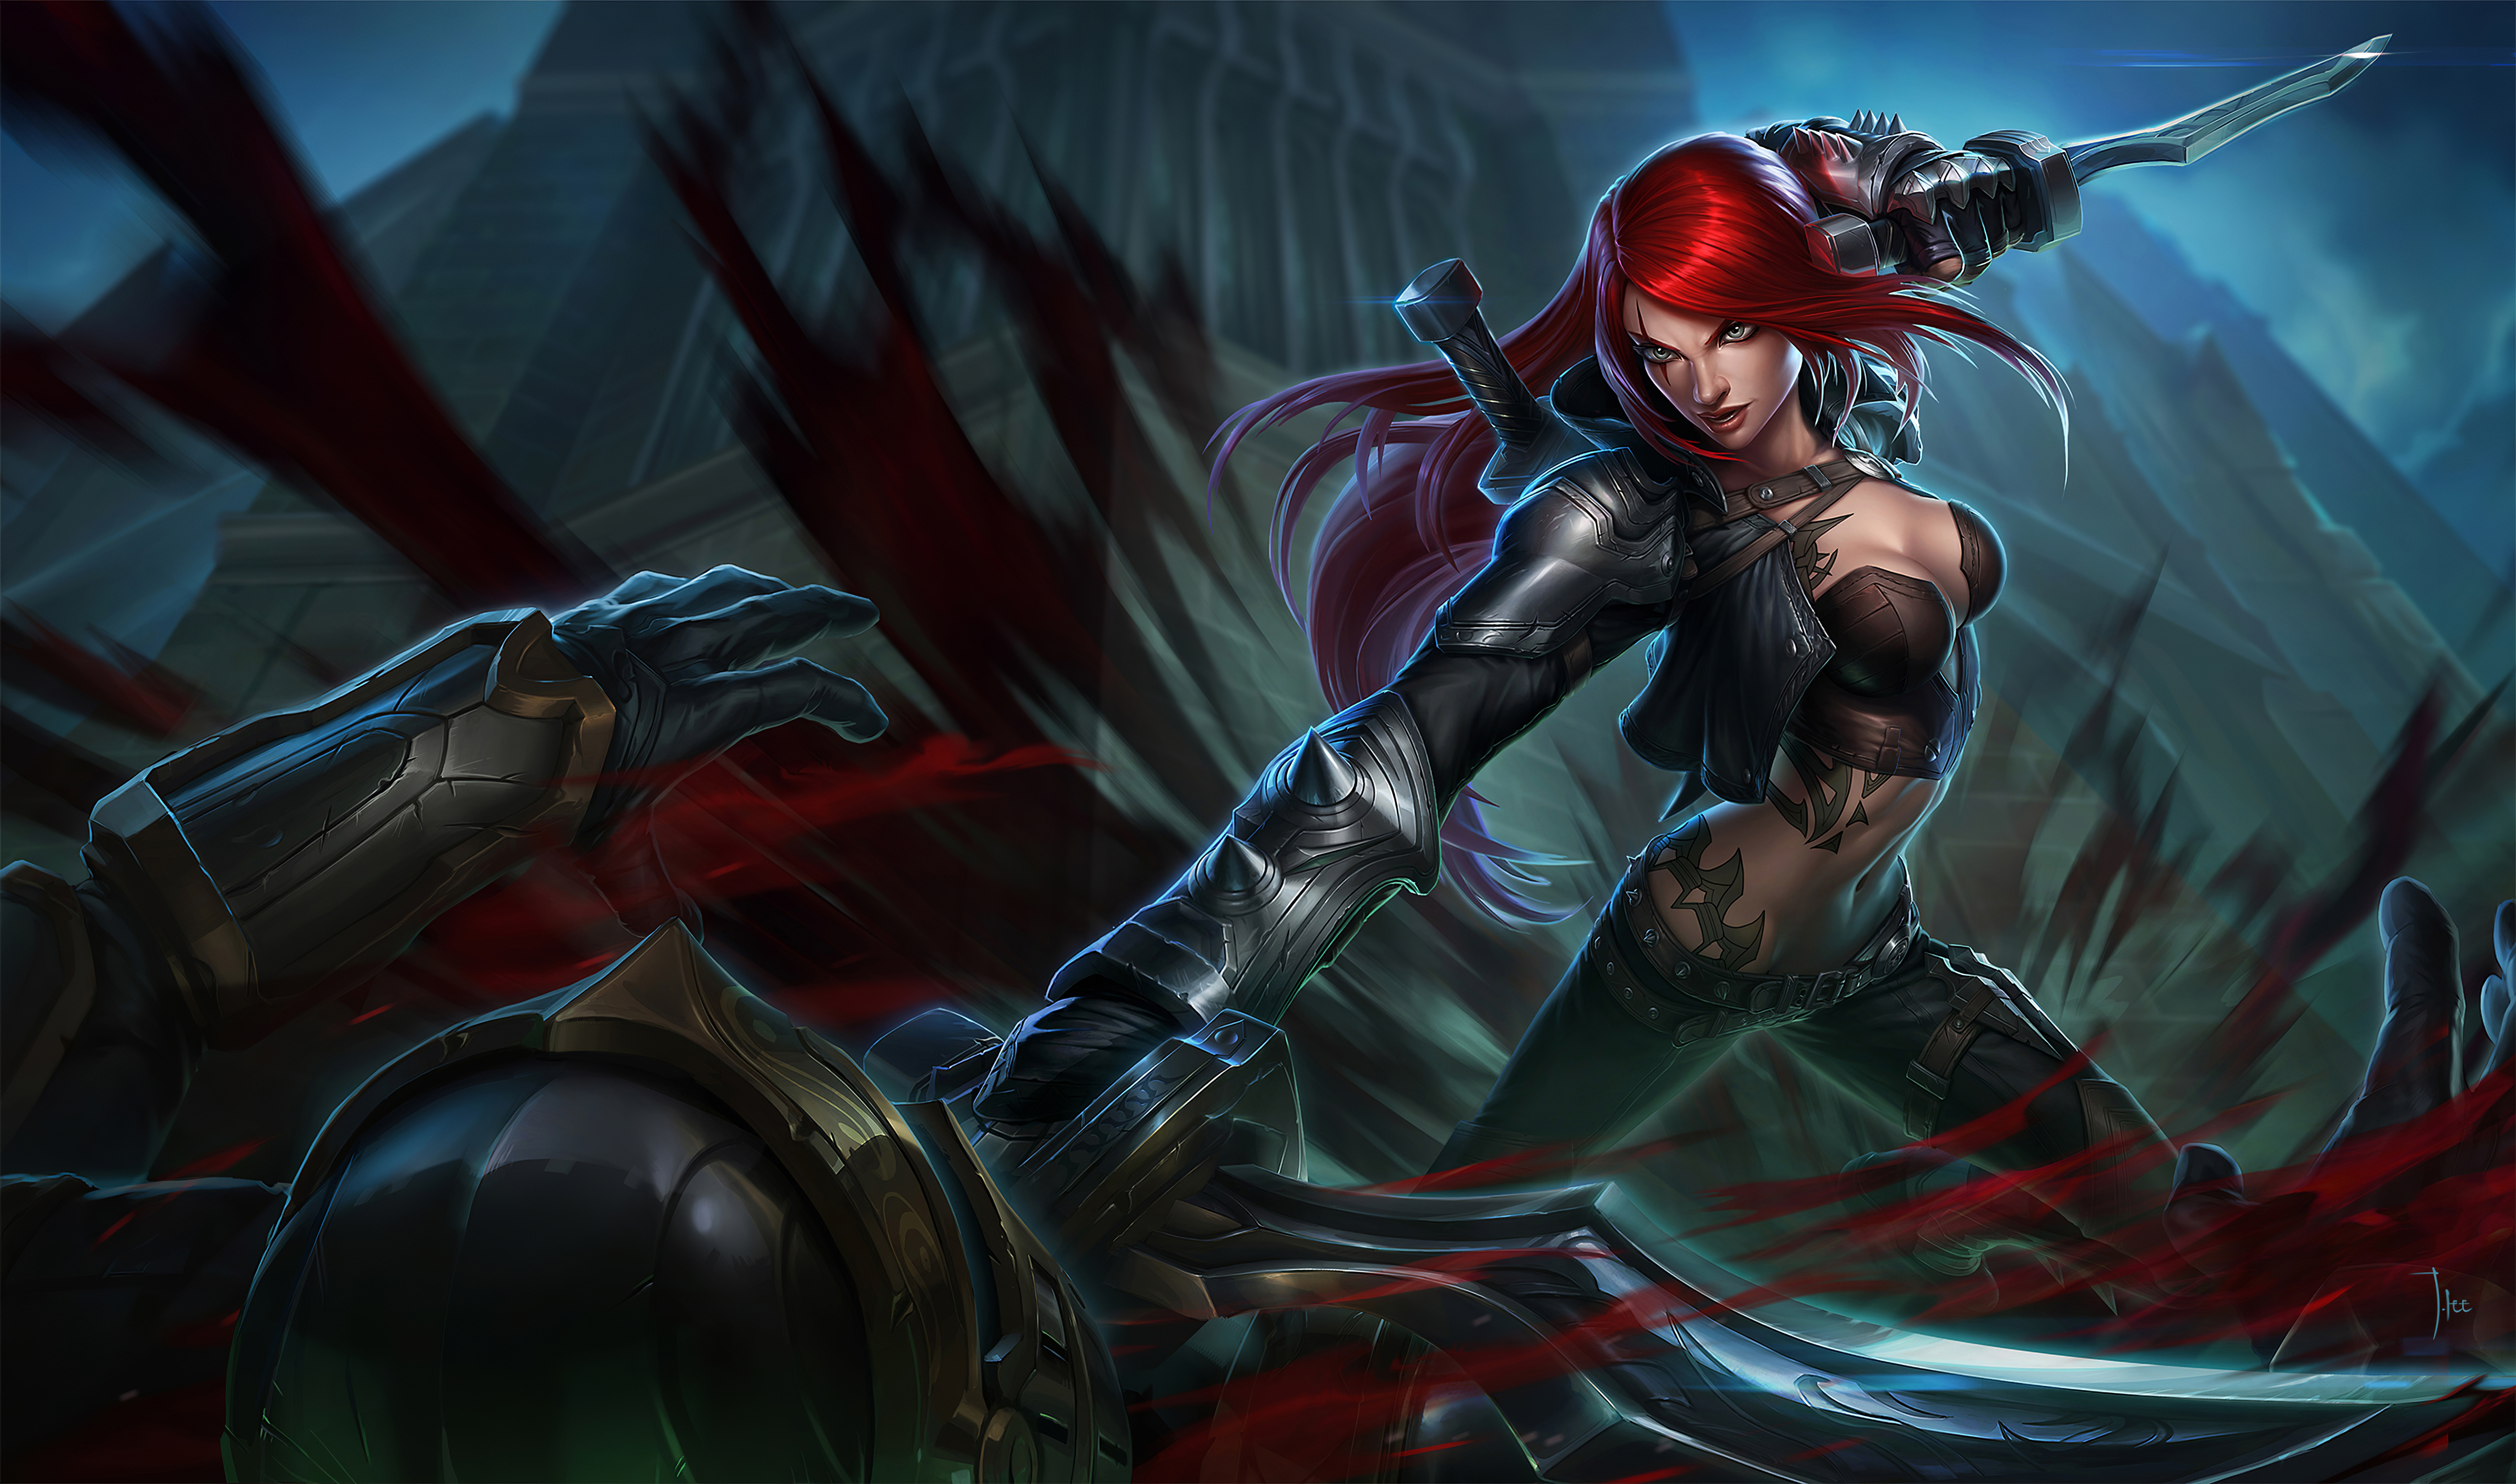 19x1080 Katarina League Of Legends 4k Laptop Full Hd 1080p Hd 4k Wallpapers Images Backgrounds Photos And Pictures